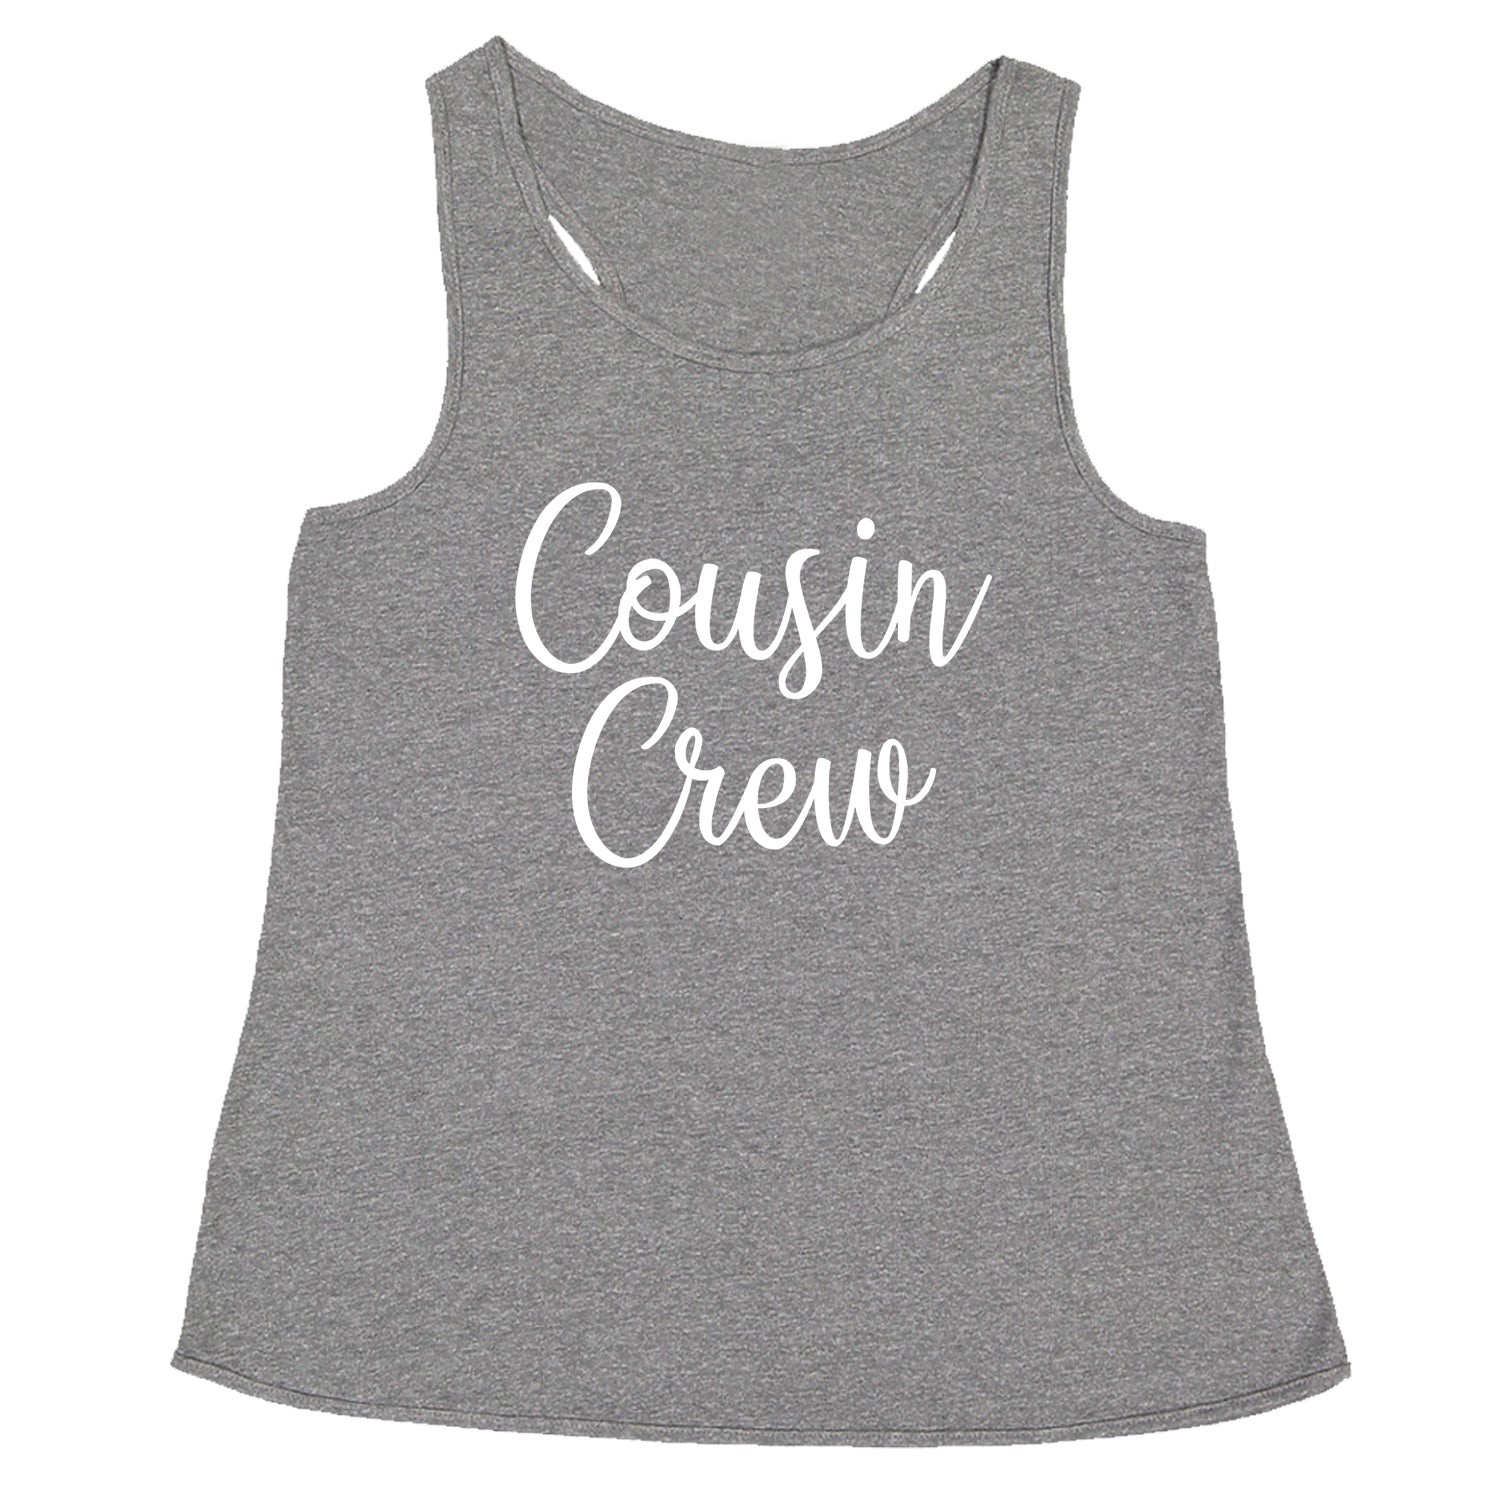 Cousin Crew Fun Family Outfit Racerback Tank Top for Women barbecue, bbq, cook, family, out, reunion by Expression Tees